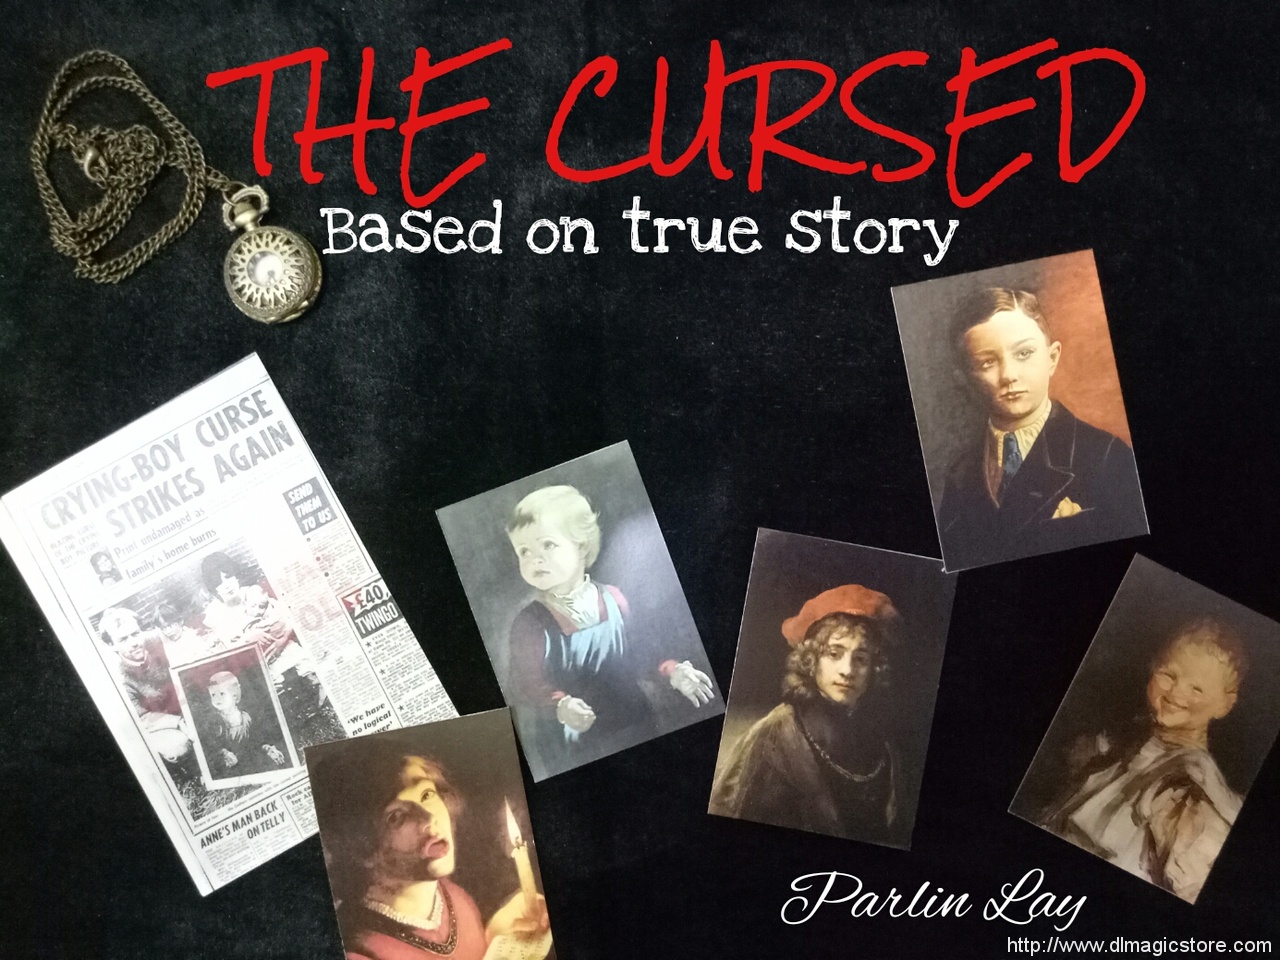 The Cursed by Parlin Lay